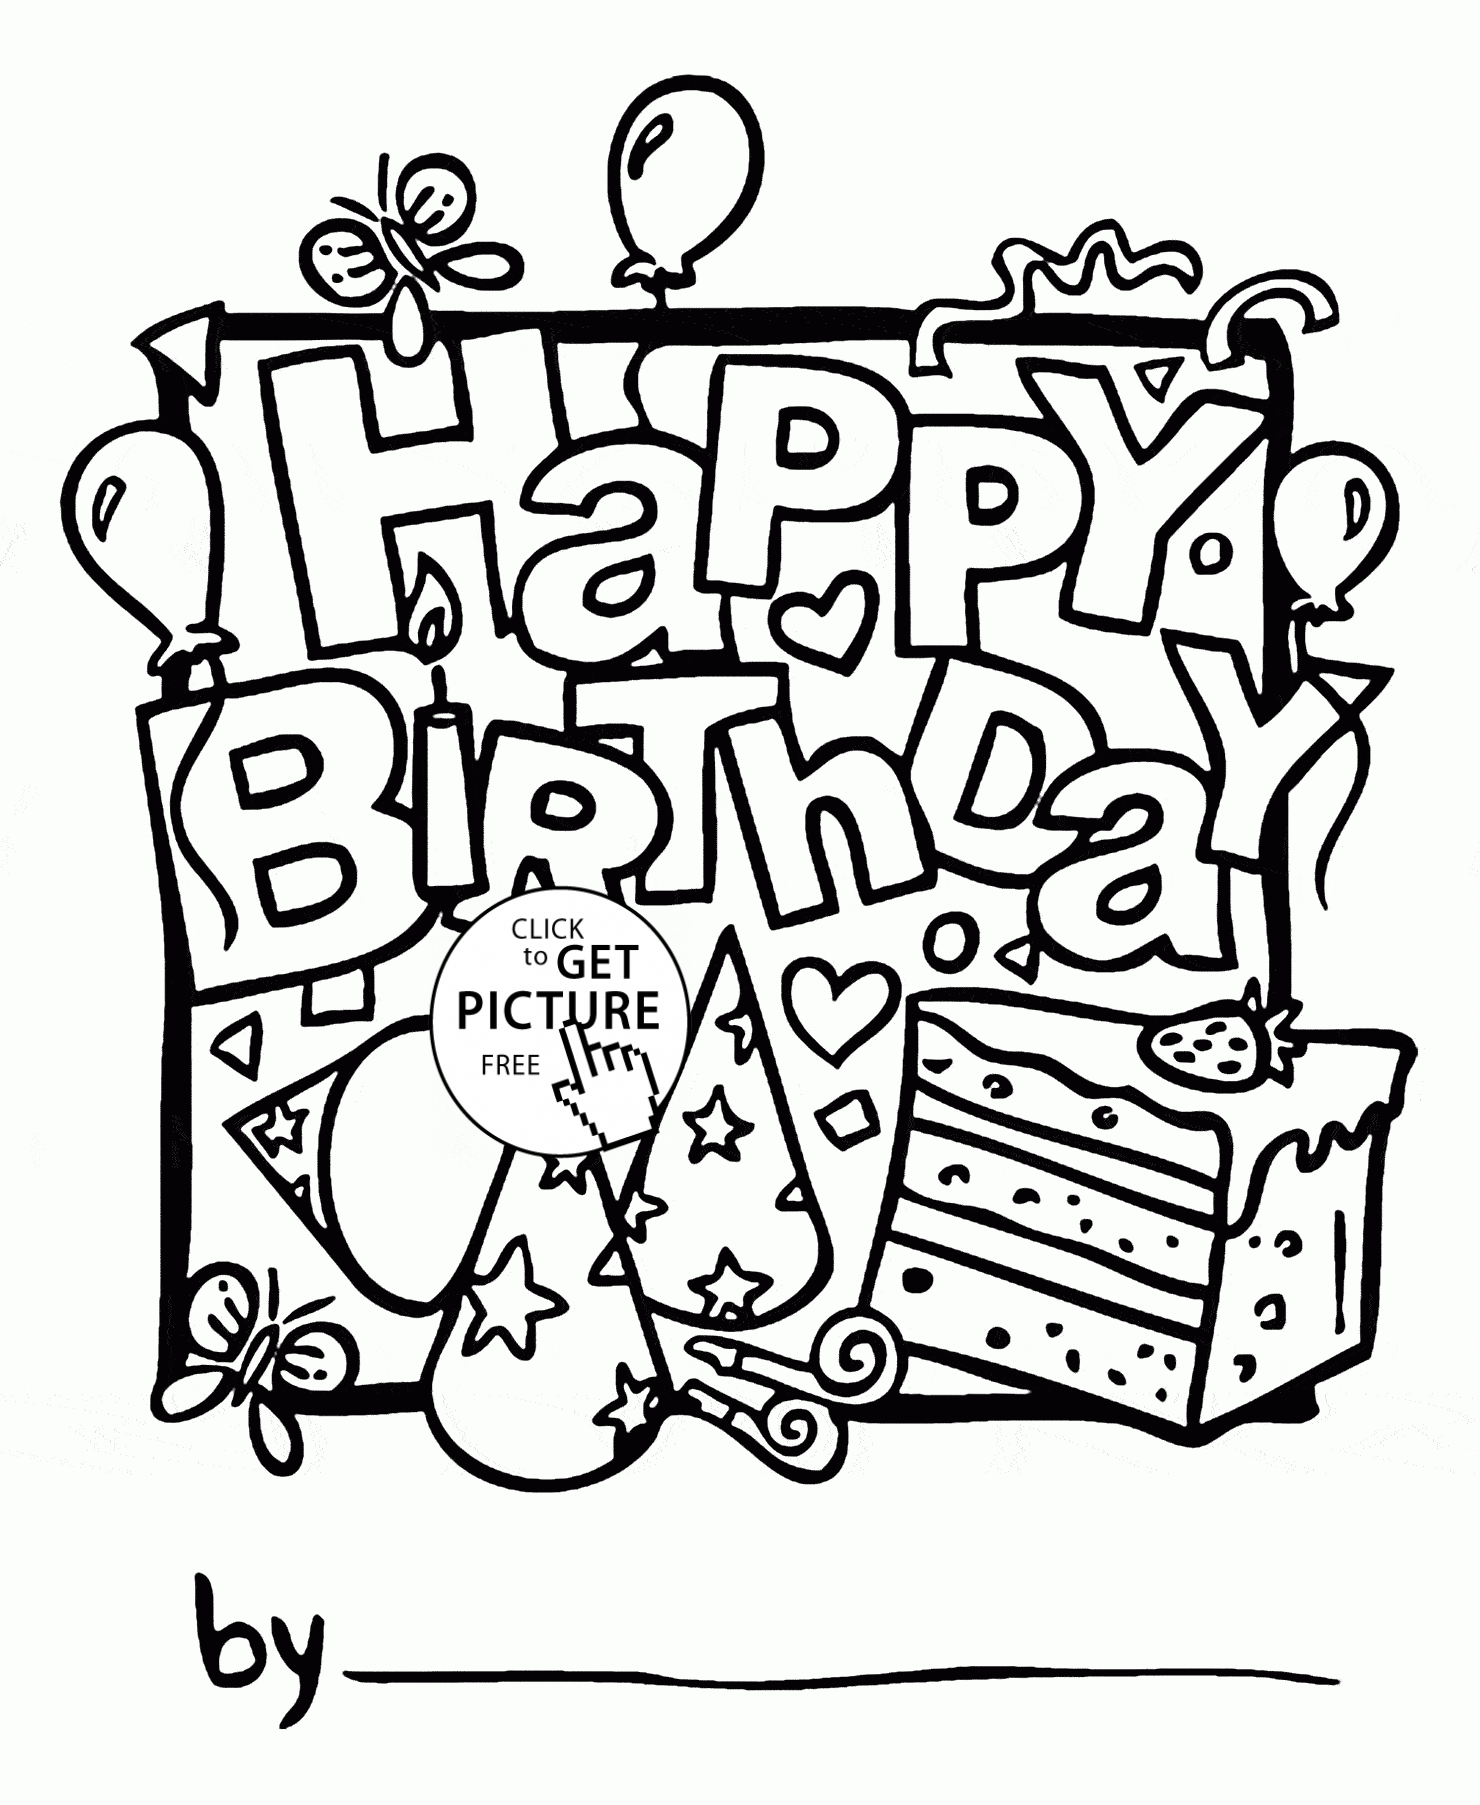 free-coloring-pages-birthday-card-for-boy-download-free-coloring-pages